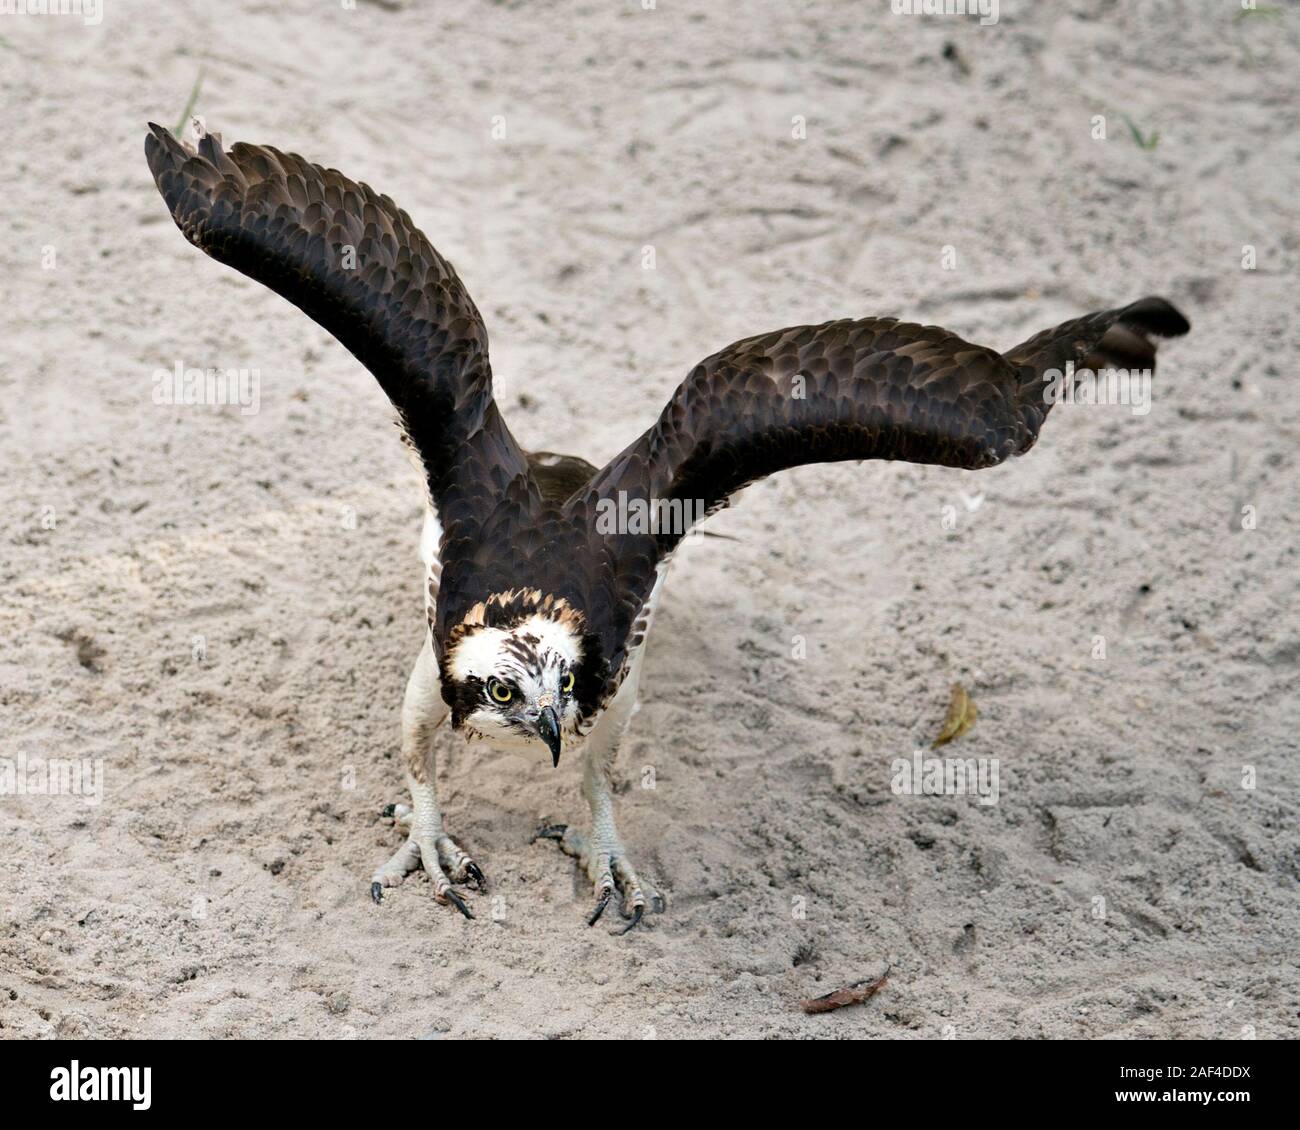 Osprey bird close-up profile view spread wings looking at the camera with sand background foreground displaying its brown plumage head, talons  in its Stock Photo